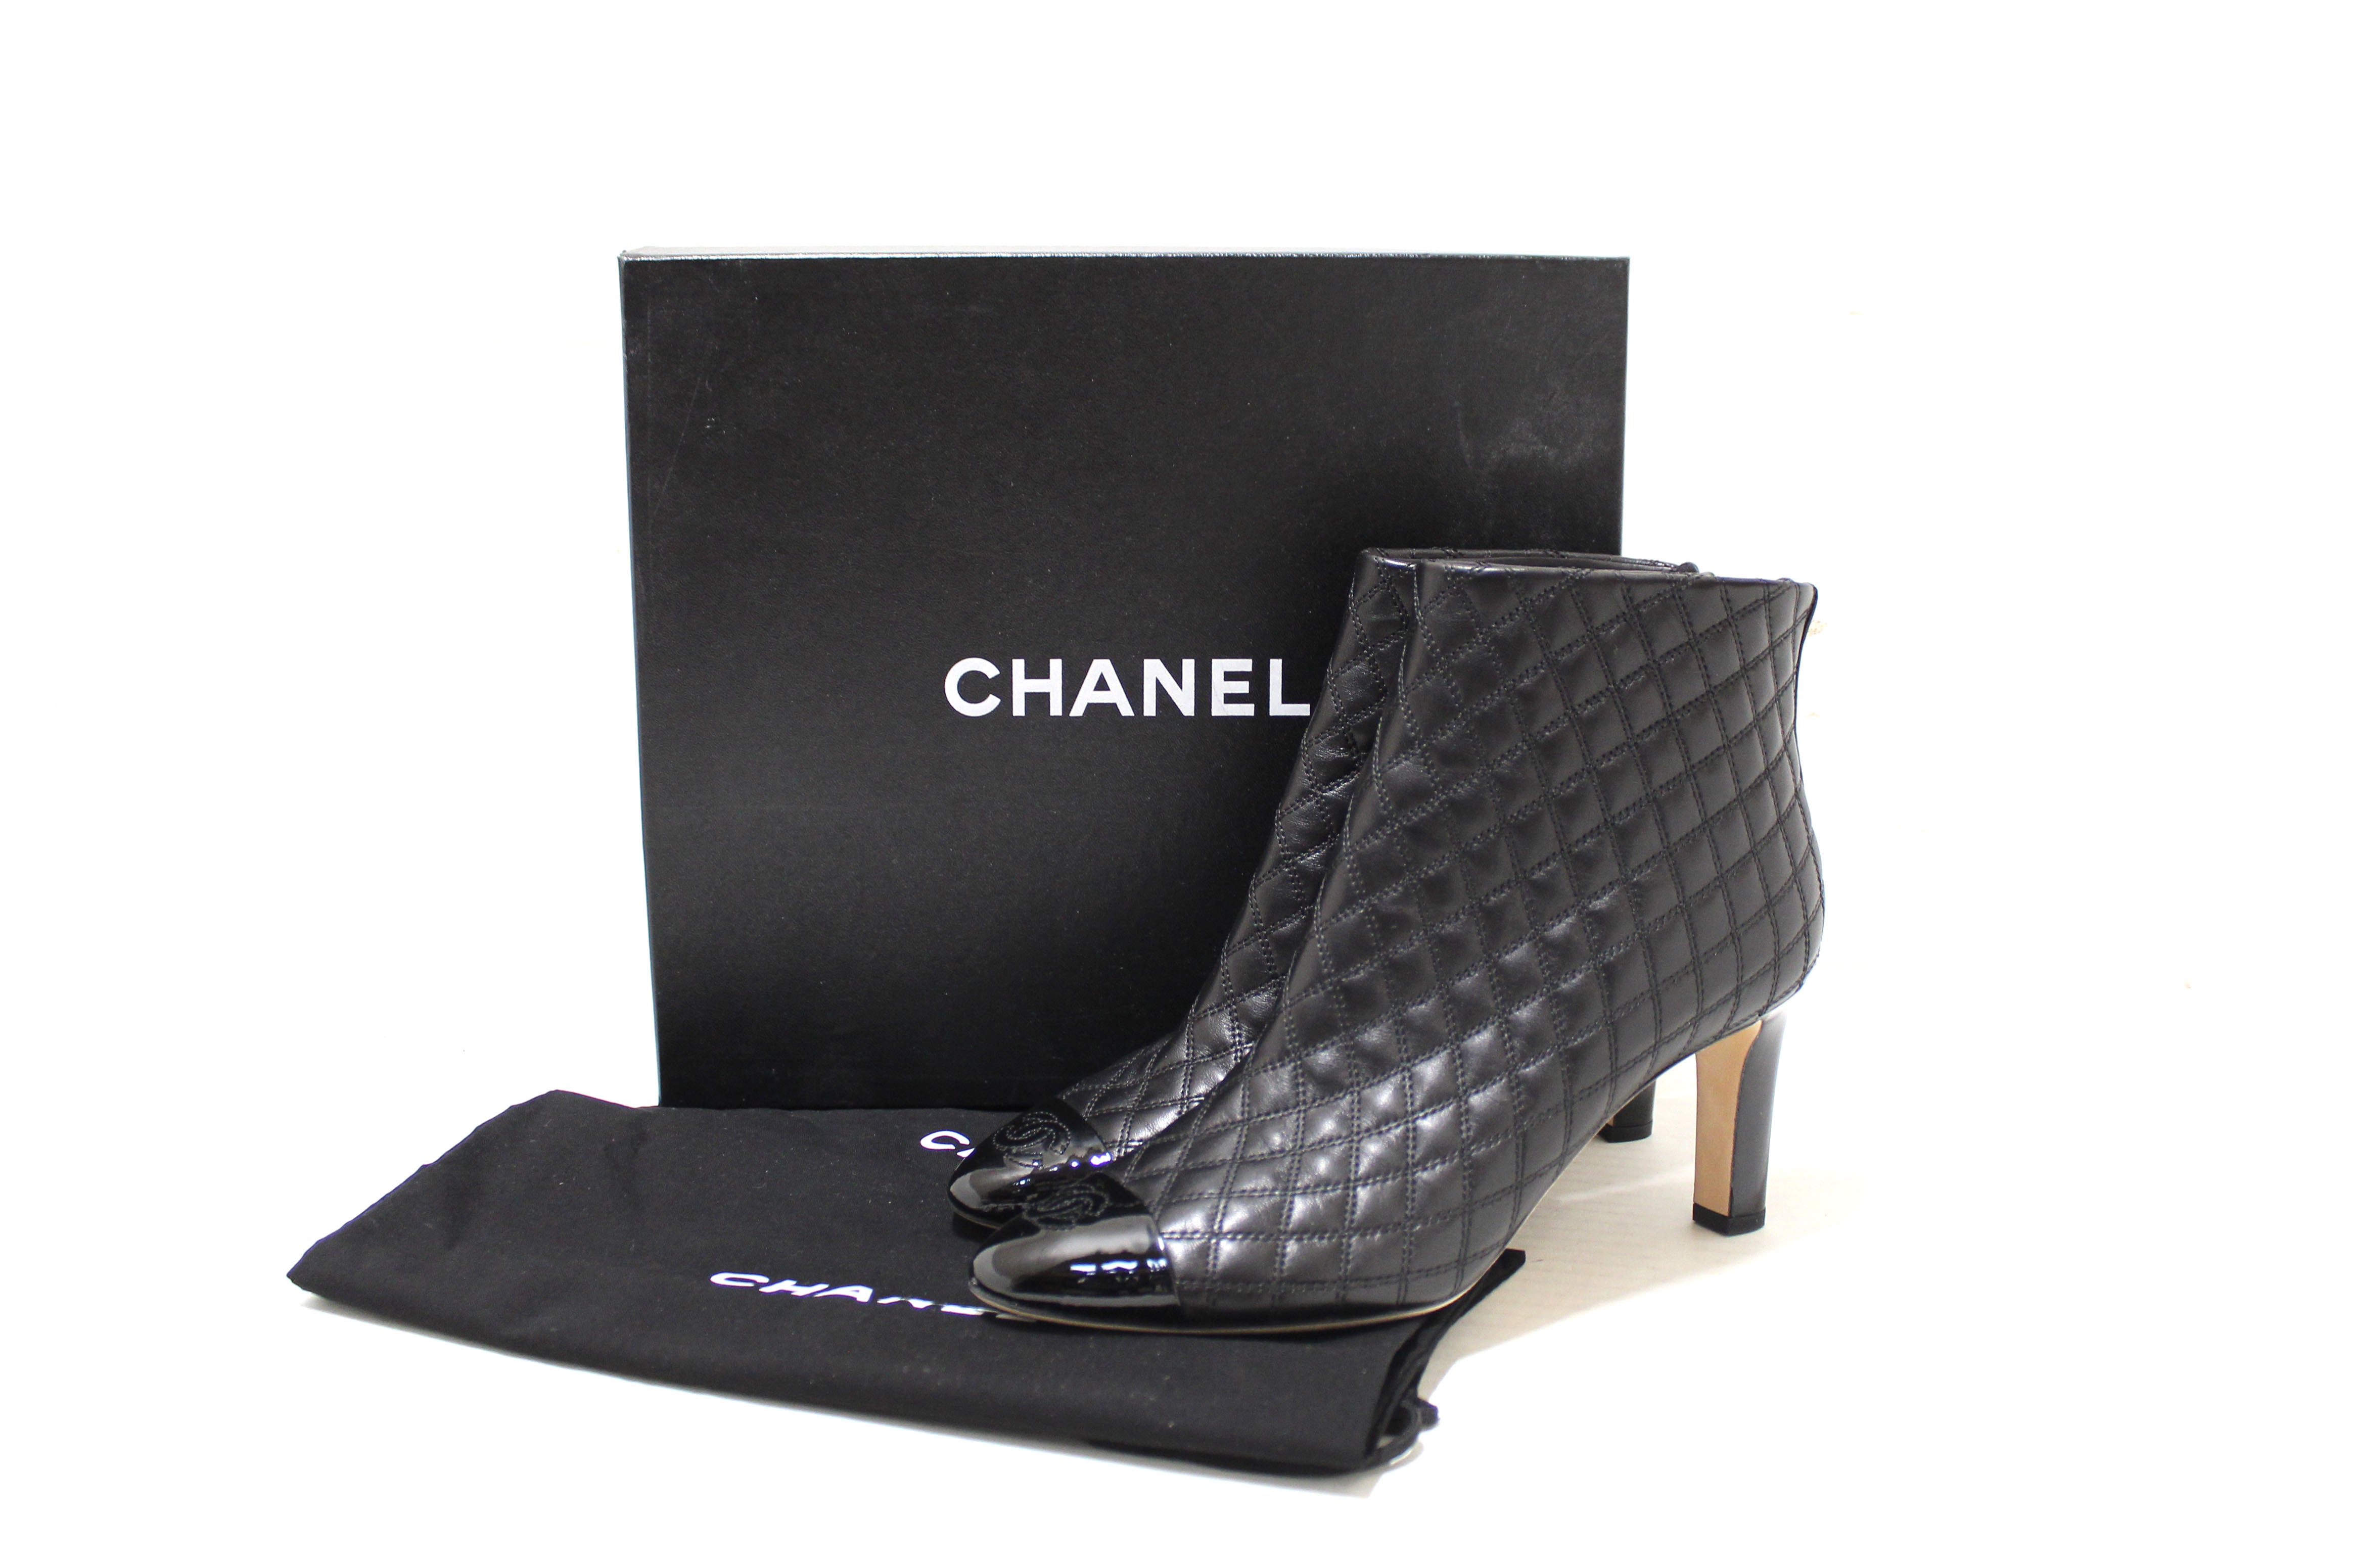 NEW Authentic Chanel Black Quilted Leather Ankle Heel Boots Size 40.5